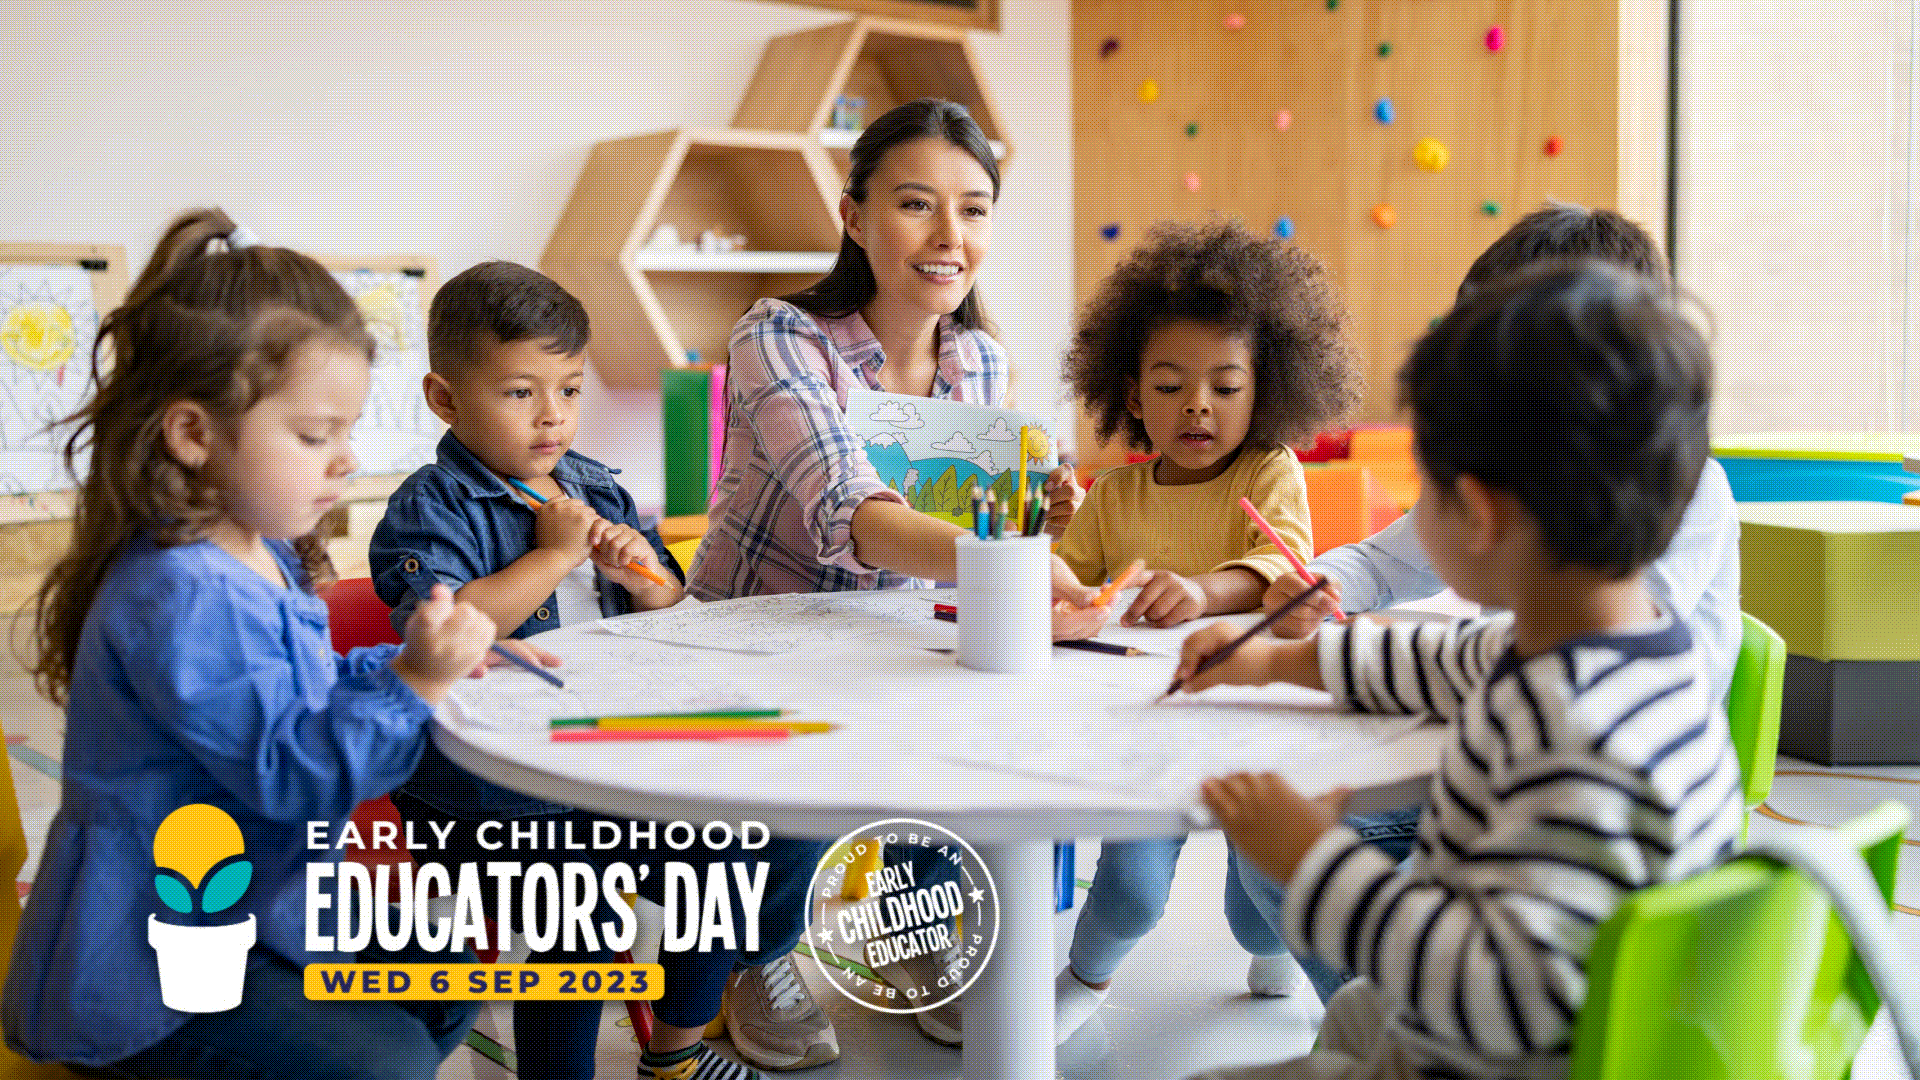 Wishing everyone a super special  Early Childhood Educators' Day!